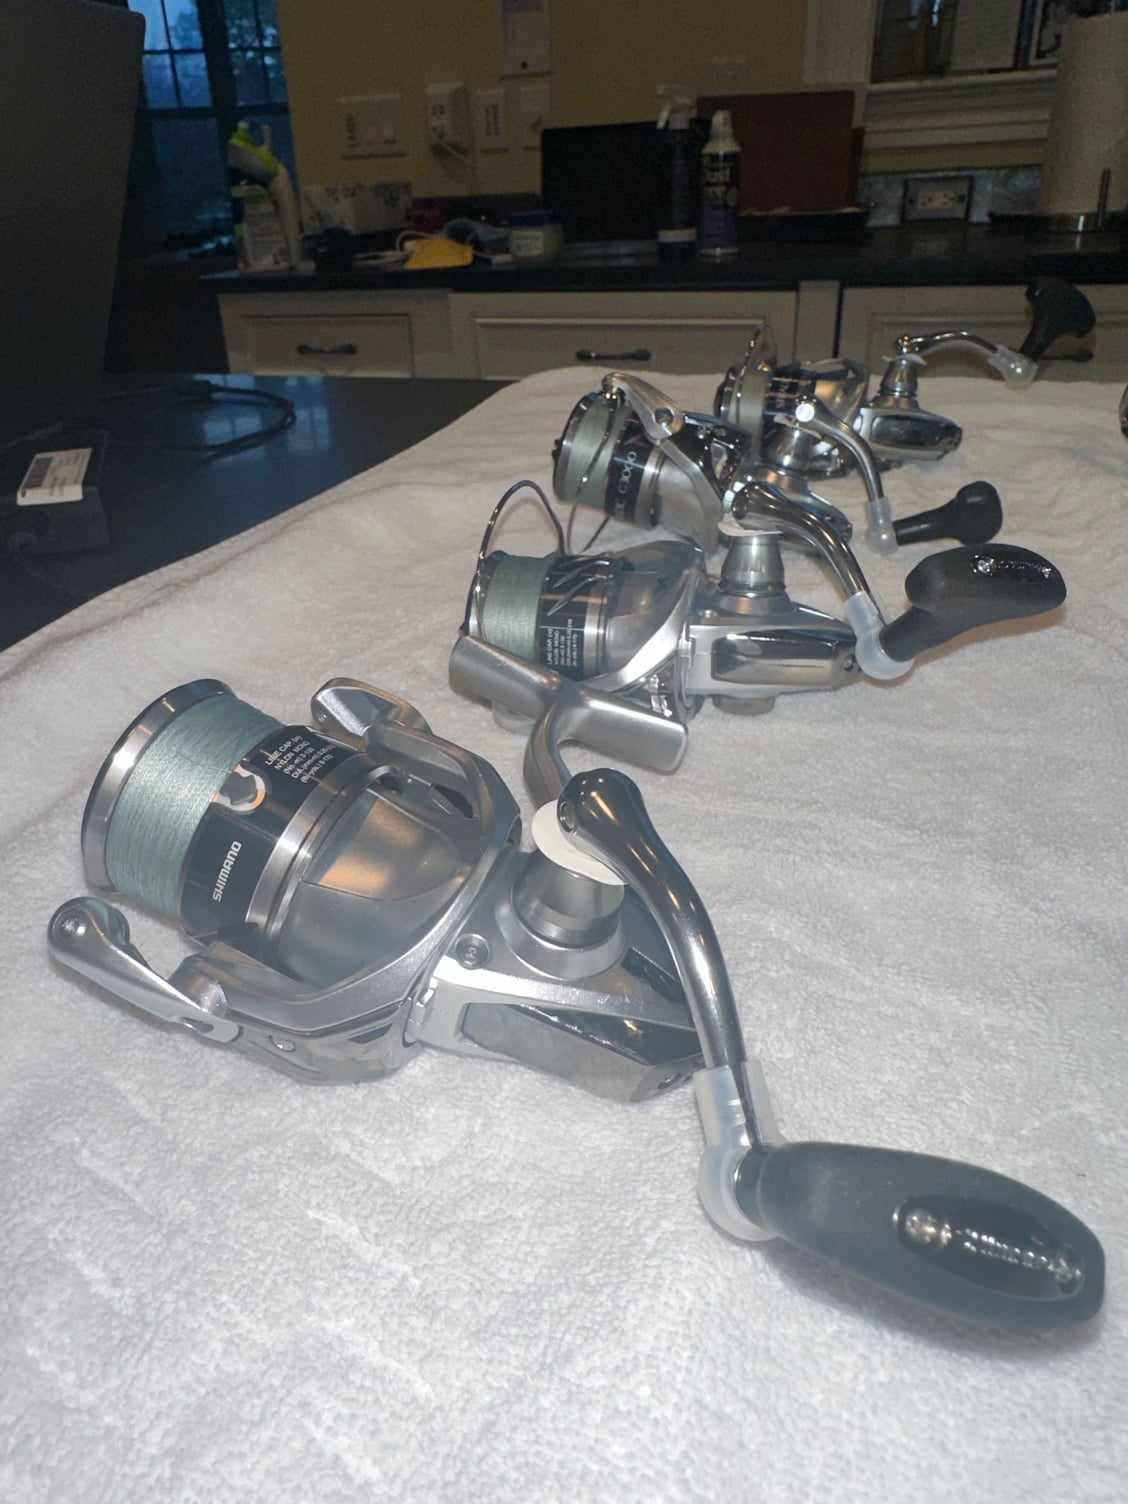 Brand New Shimano Stradic Spinning Reels 3000 and 4000 - The Hull Truth -  Boating and Fishing Forum